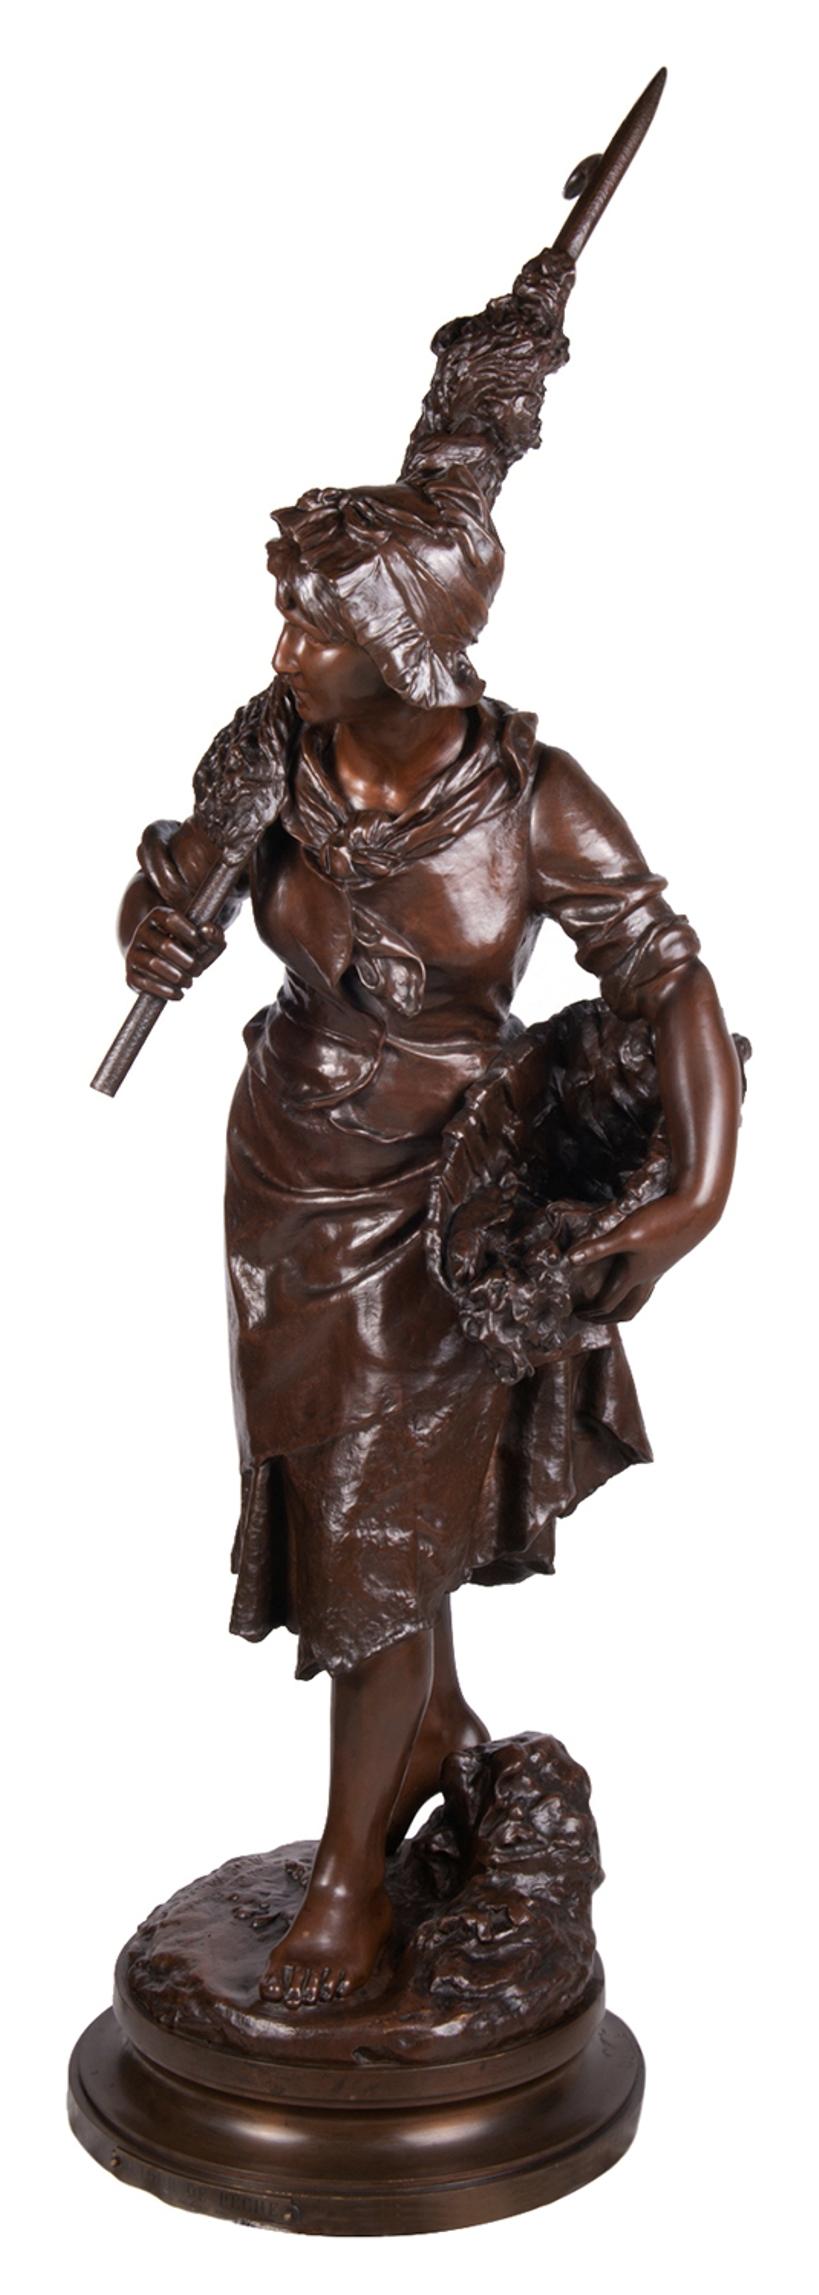 A very good quality late 19th century French bronze statue entitled 'Return from fishing'
Signed: Math. Moreau

Signed Math Moreau.

Mathurin Moreau born 1822, died 1912.

The eldest son of sculptor and painter Jean-Baptiste Moreau, and